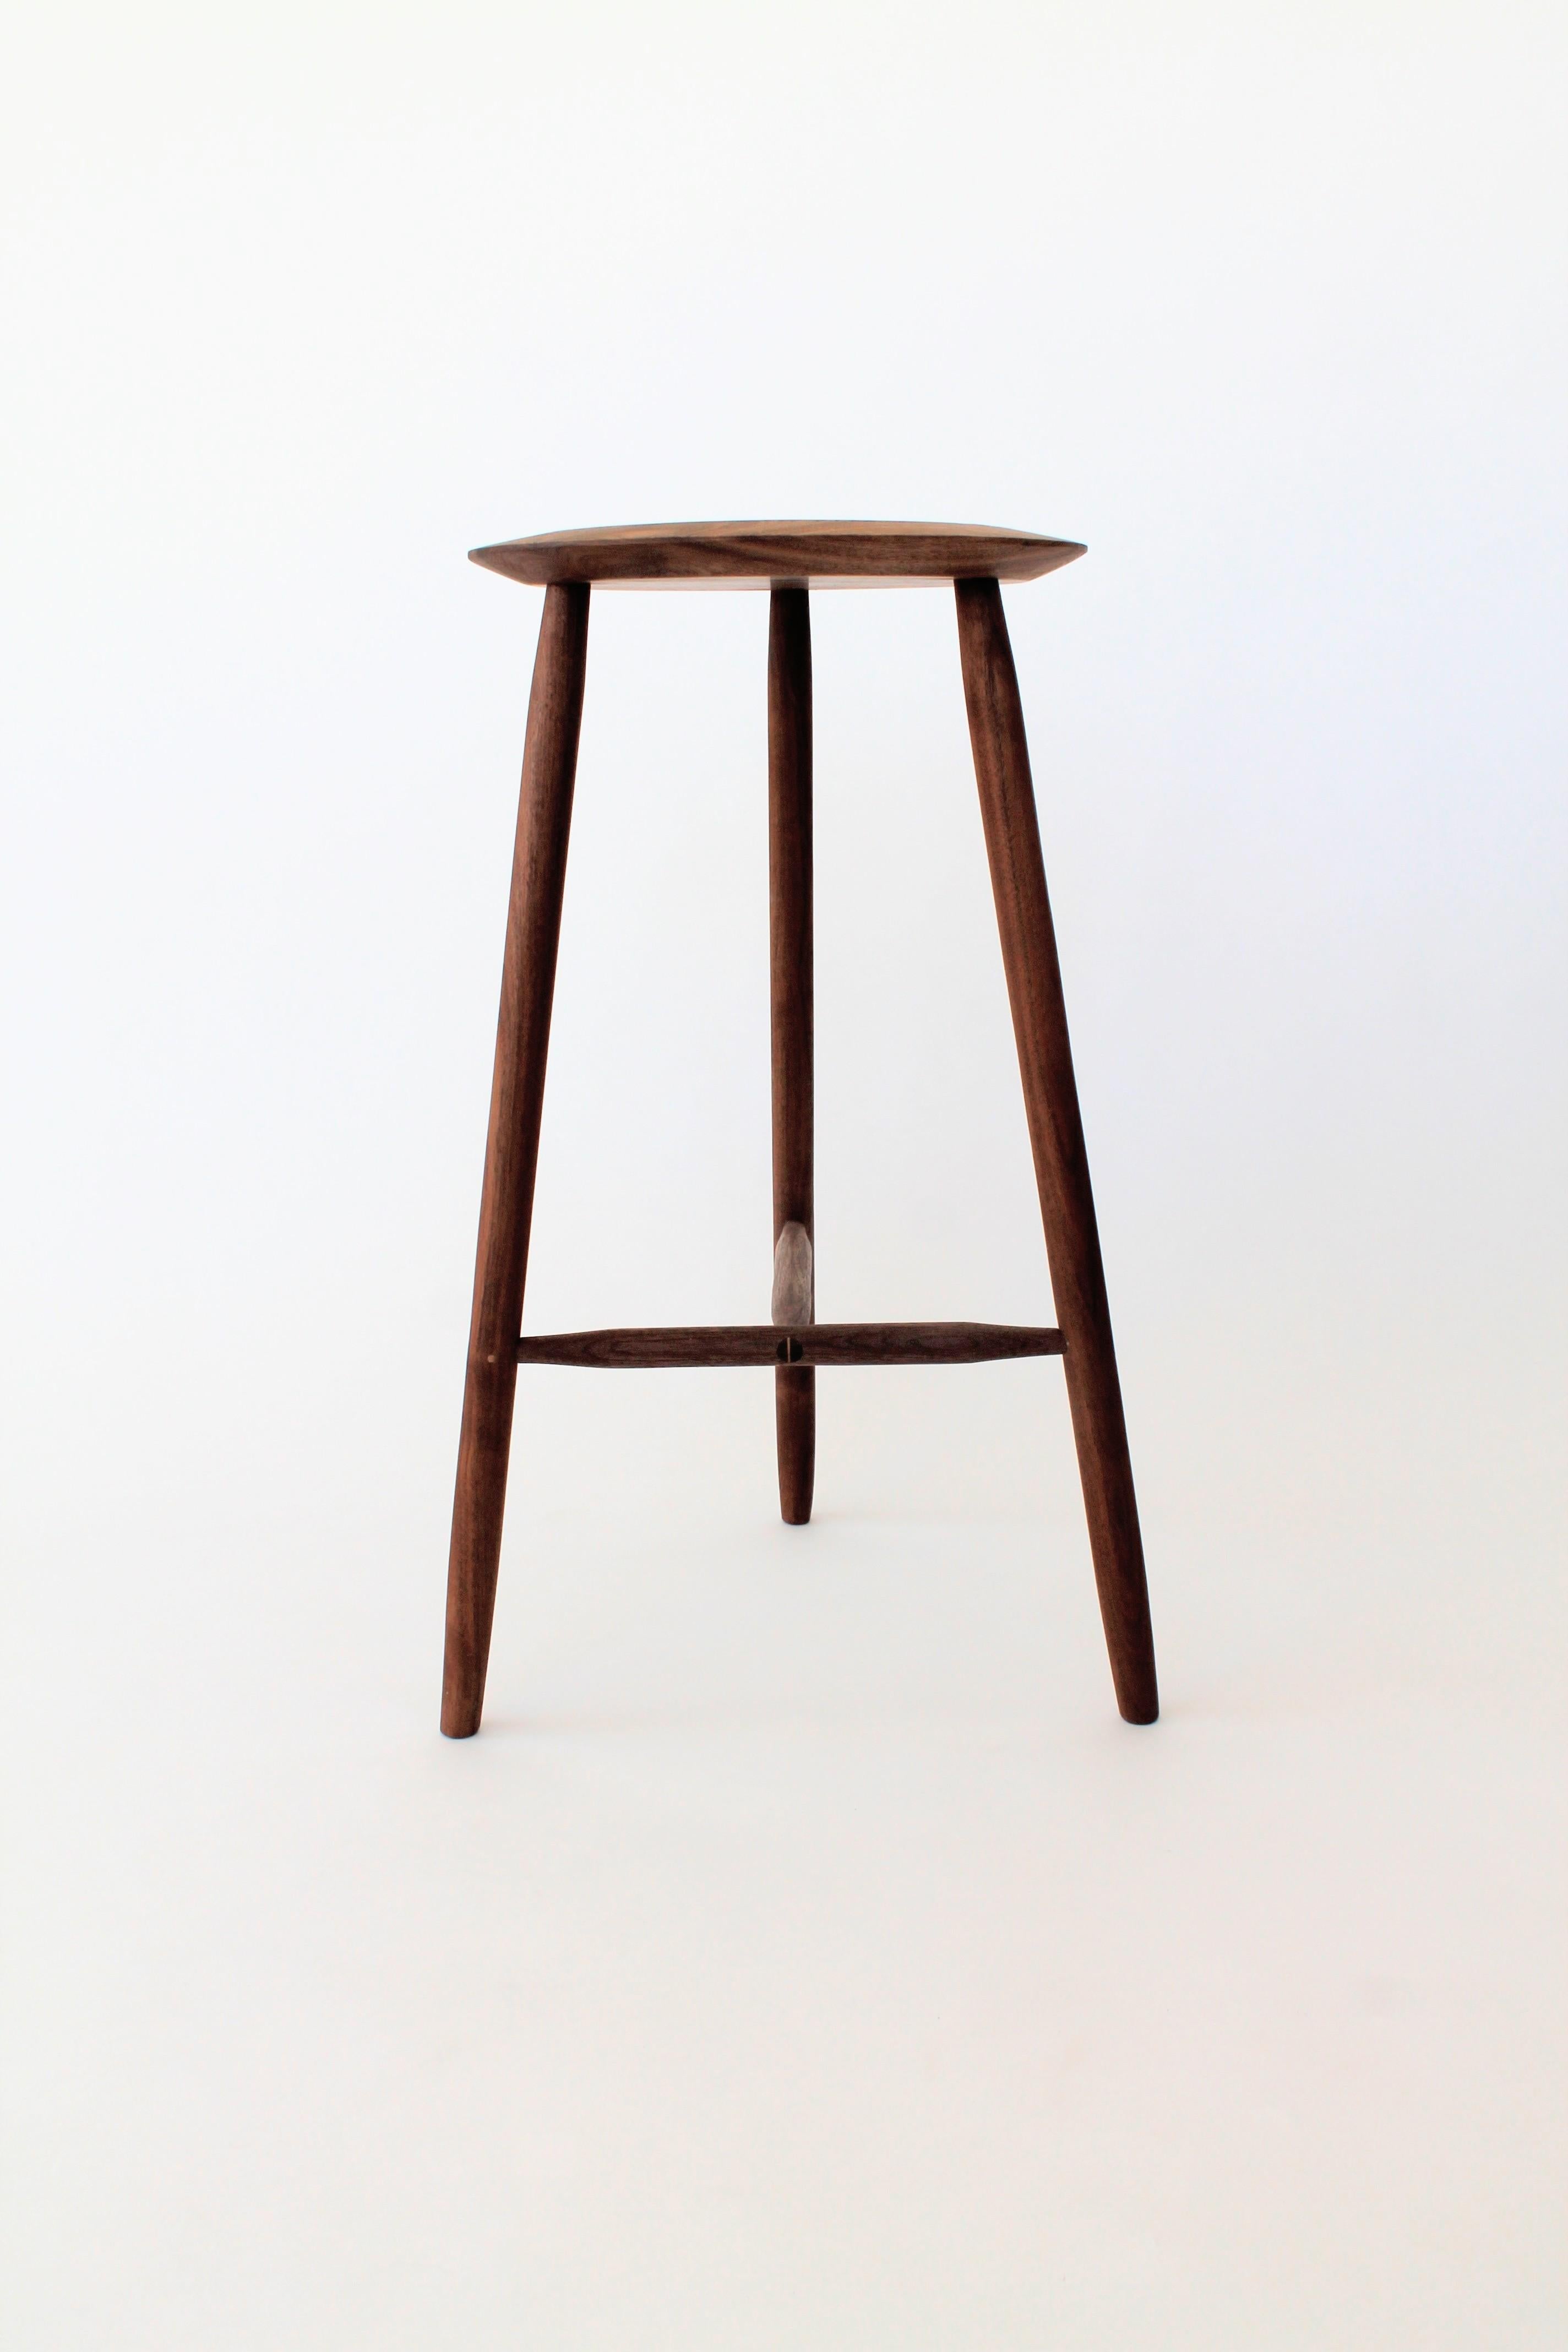 Light and strong, the Beachcomber bar stool evokes the sight of an old wooden monohull; it's lean, sturdy mast together with the rigging worthy of the high seas. Constructed of hand shaped legs and stretchers, each piece is carefully fit and pinned